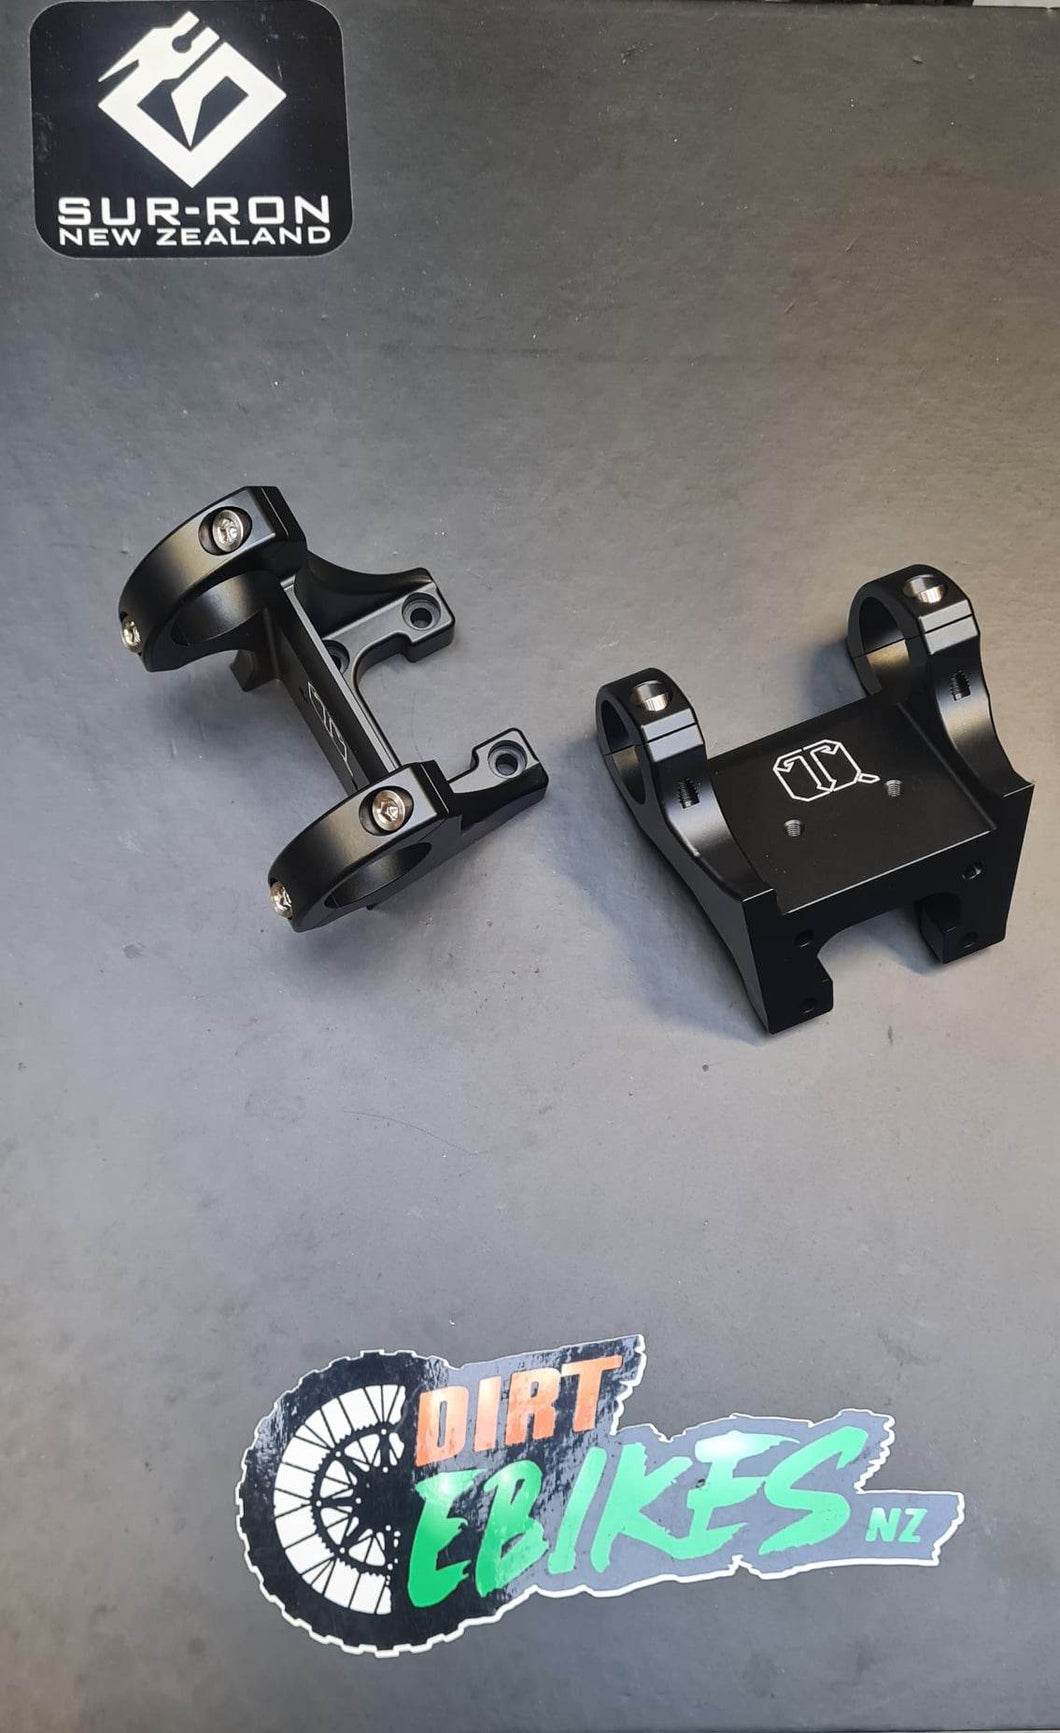 Direct mount handle bar clamp latest model - 70mm rise.